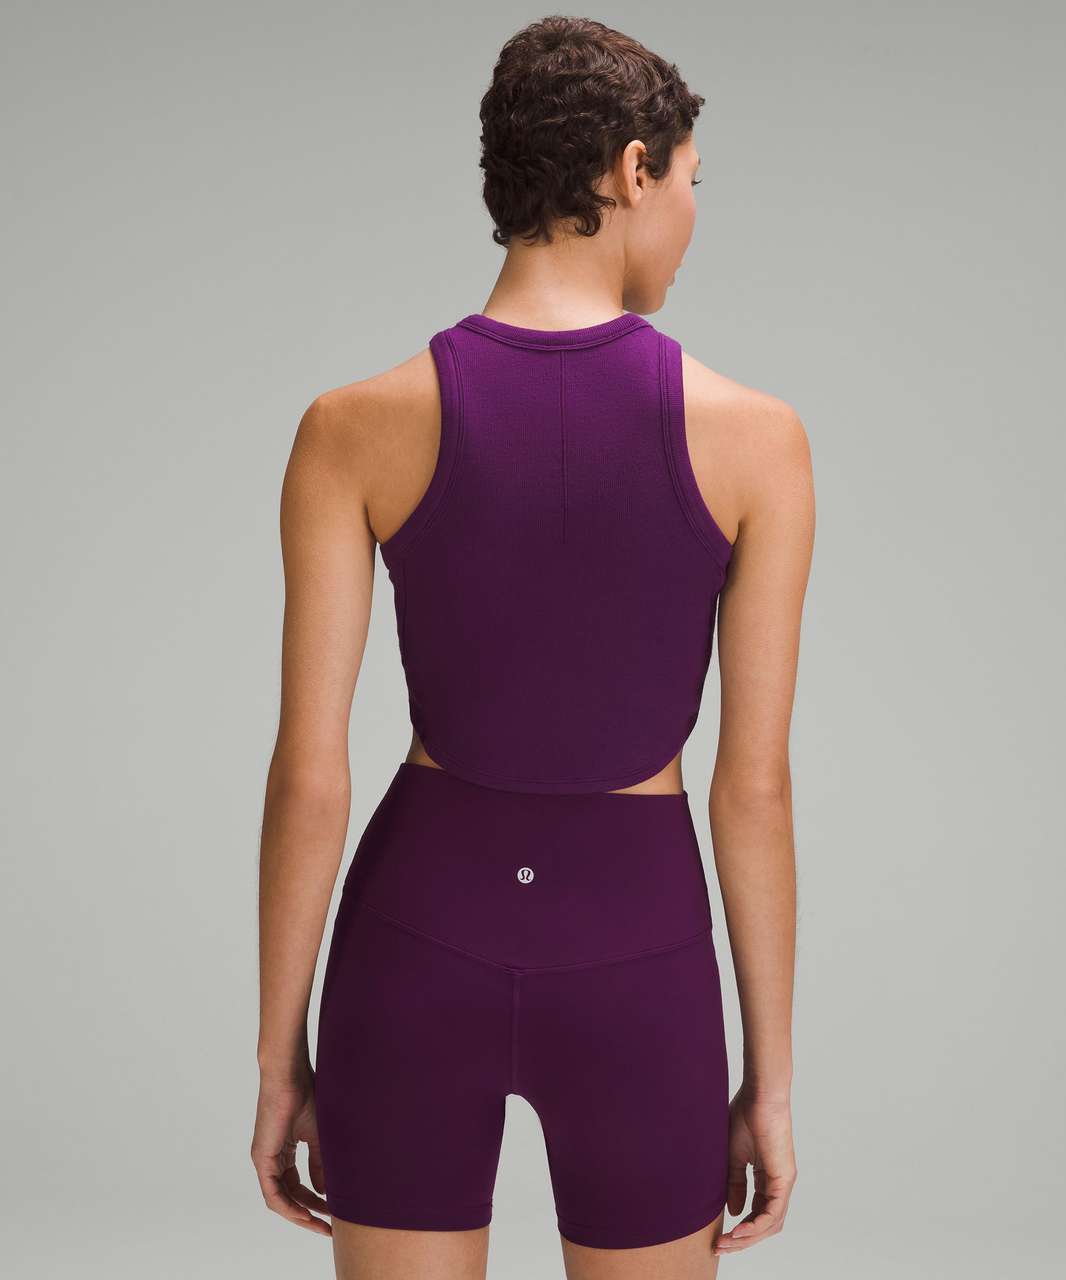 Lululemon Hold Tight Cropped Tank Top - Dramatic Magenta